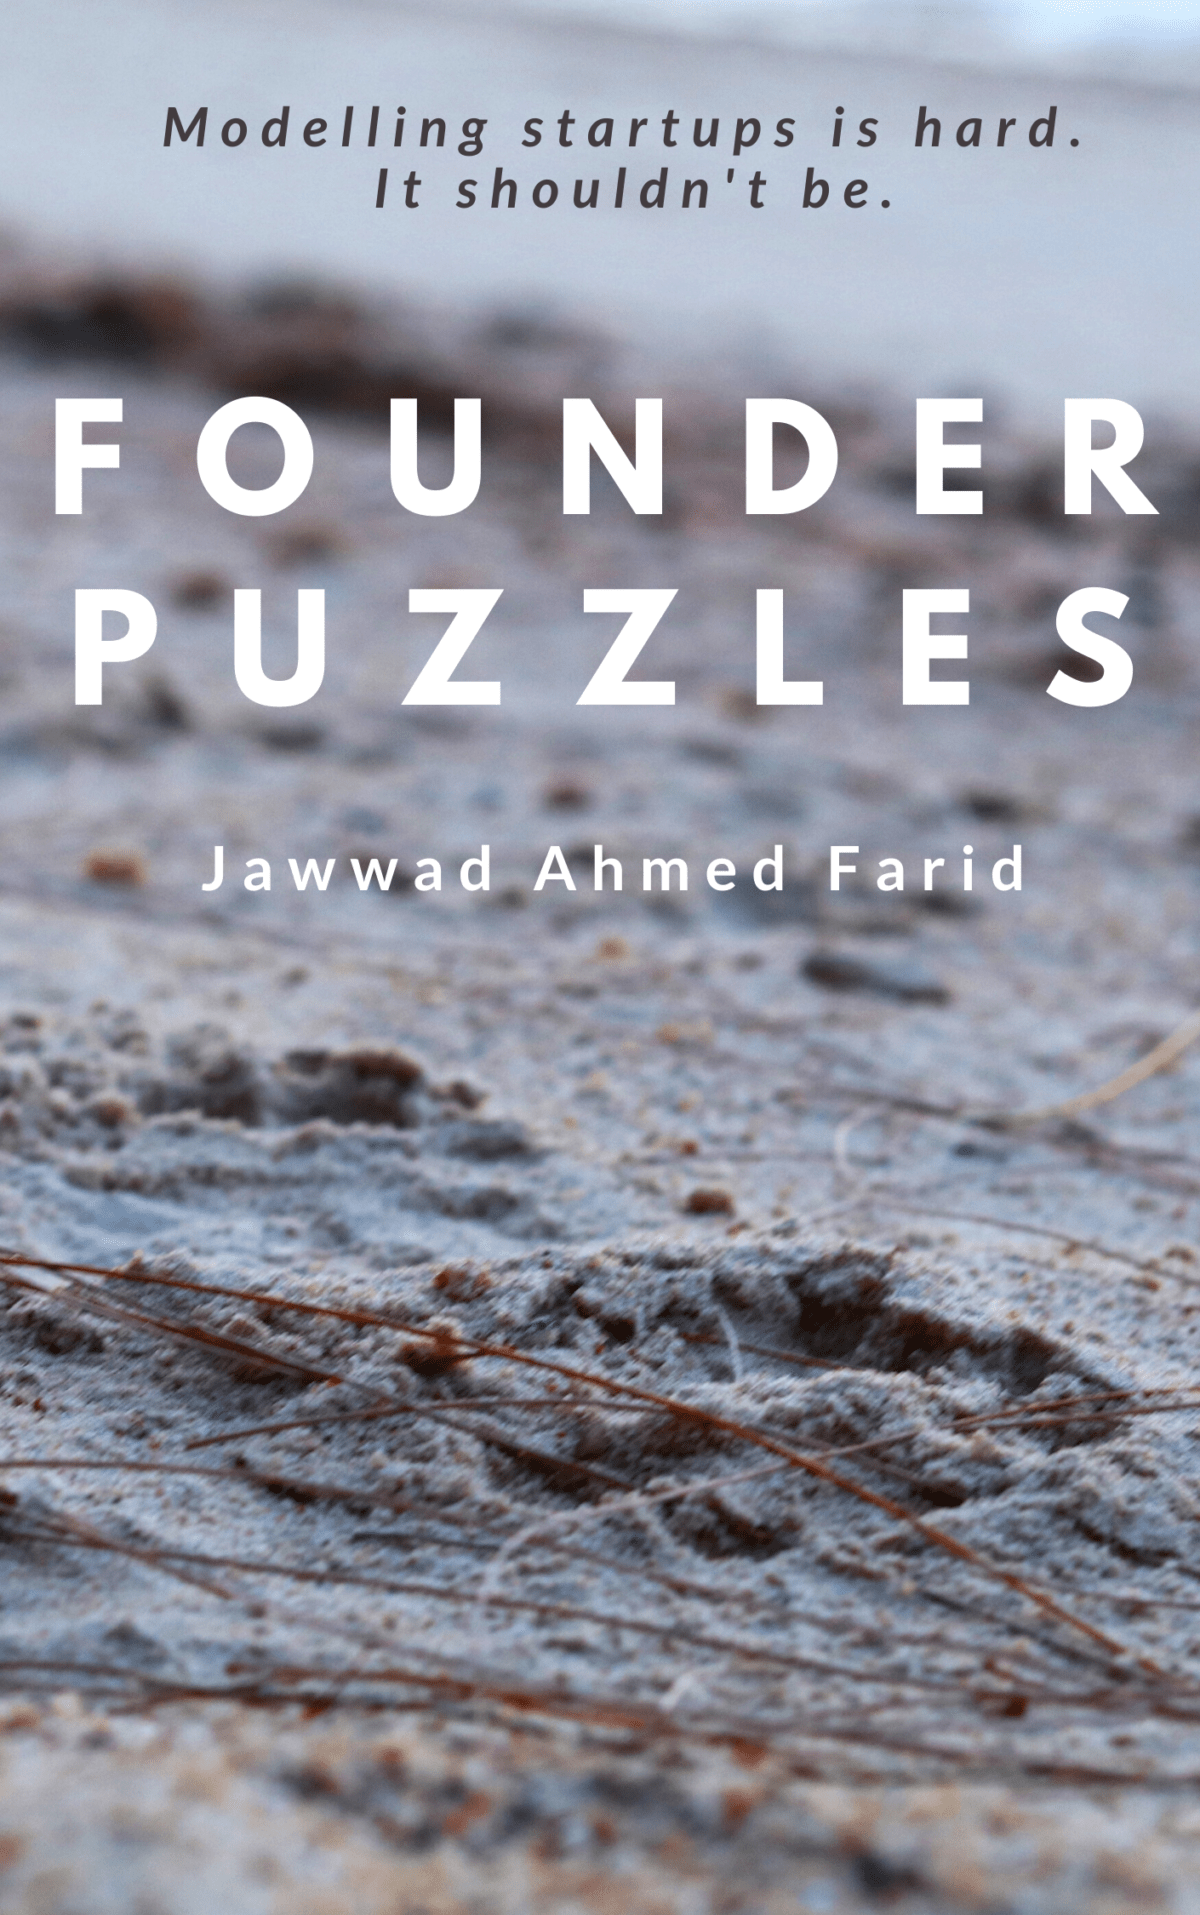 Founder Puzzles - Build better businesses